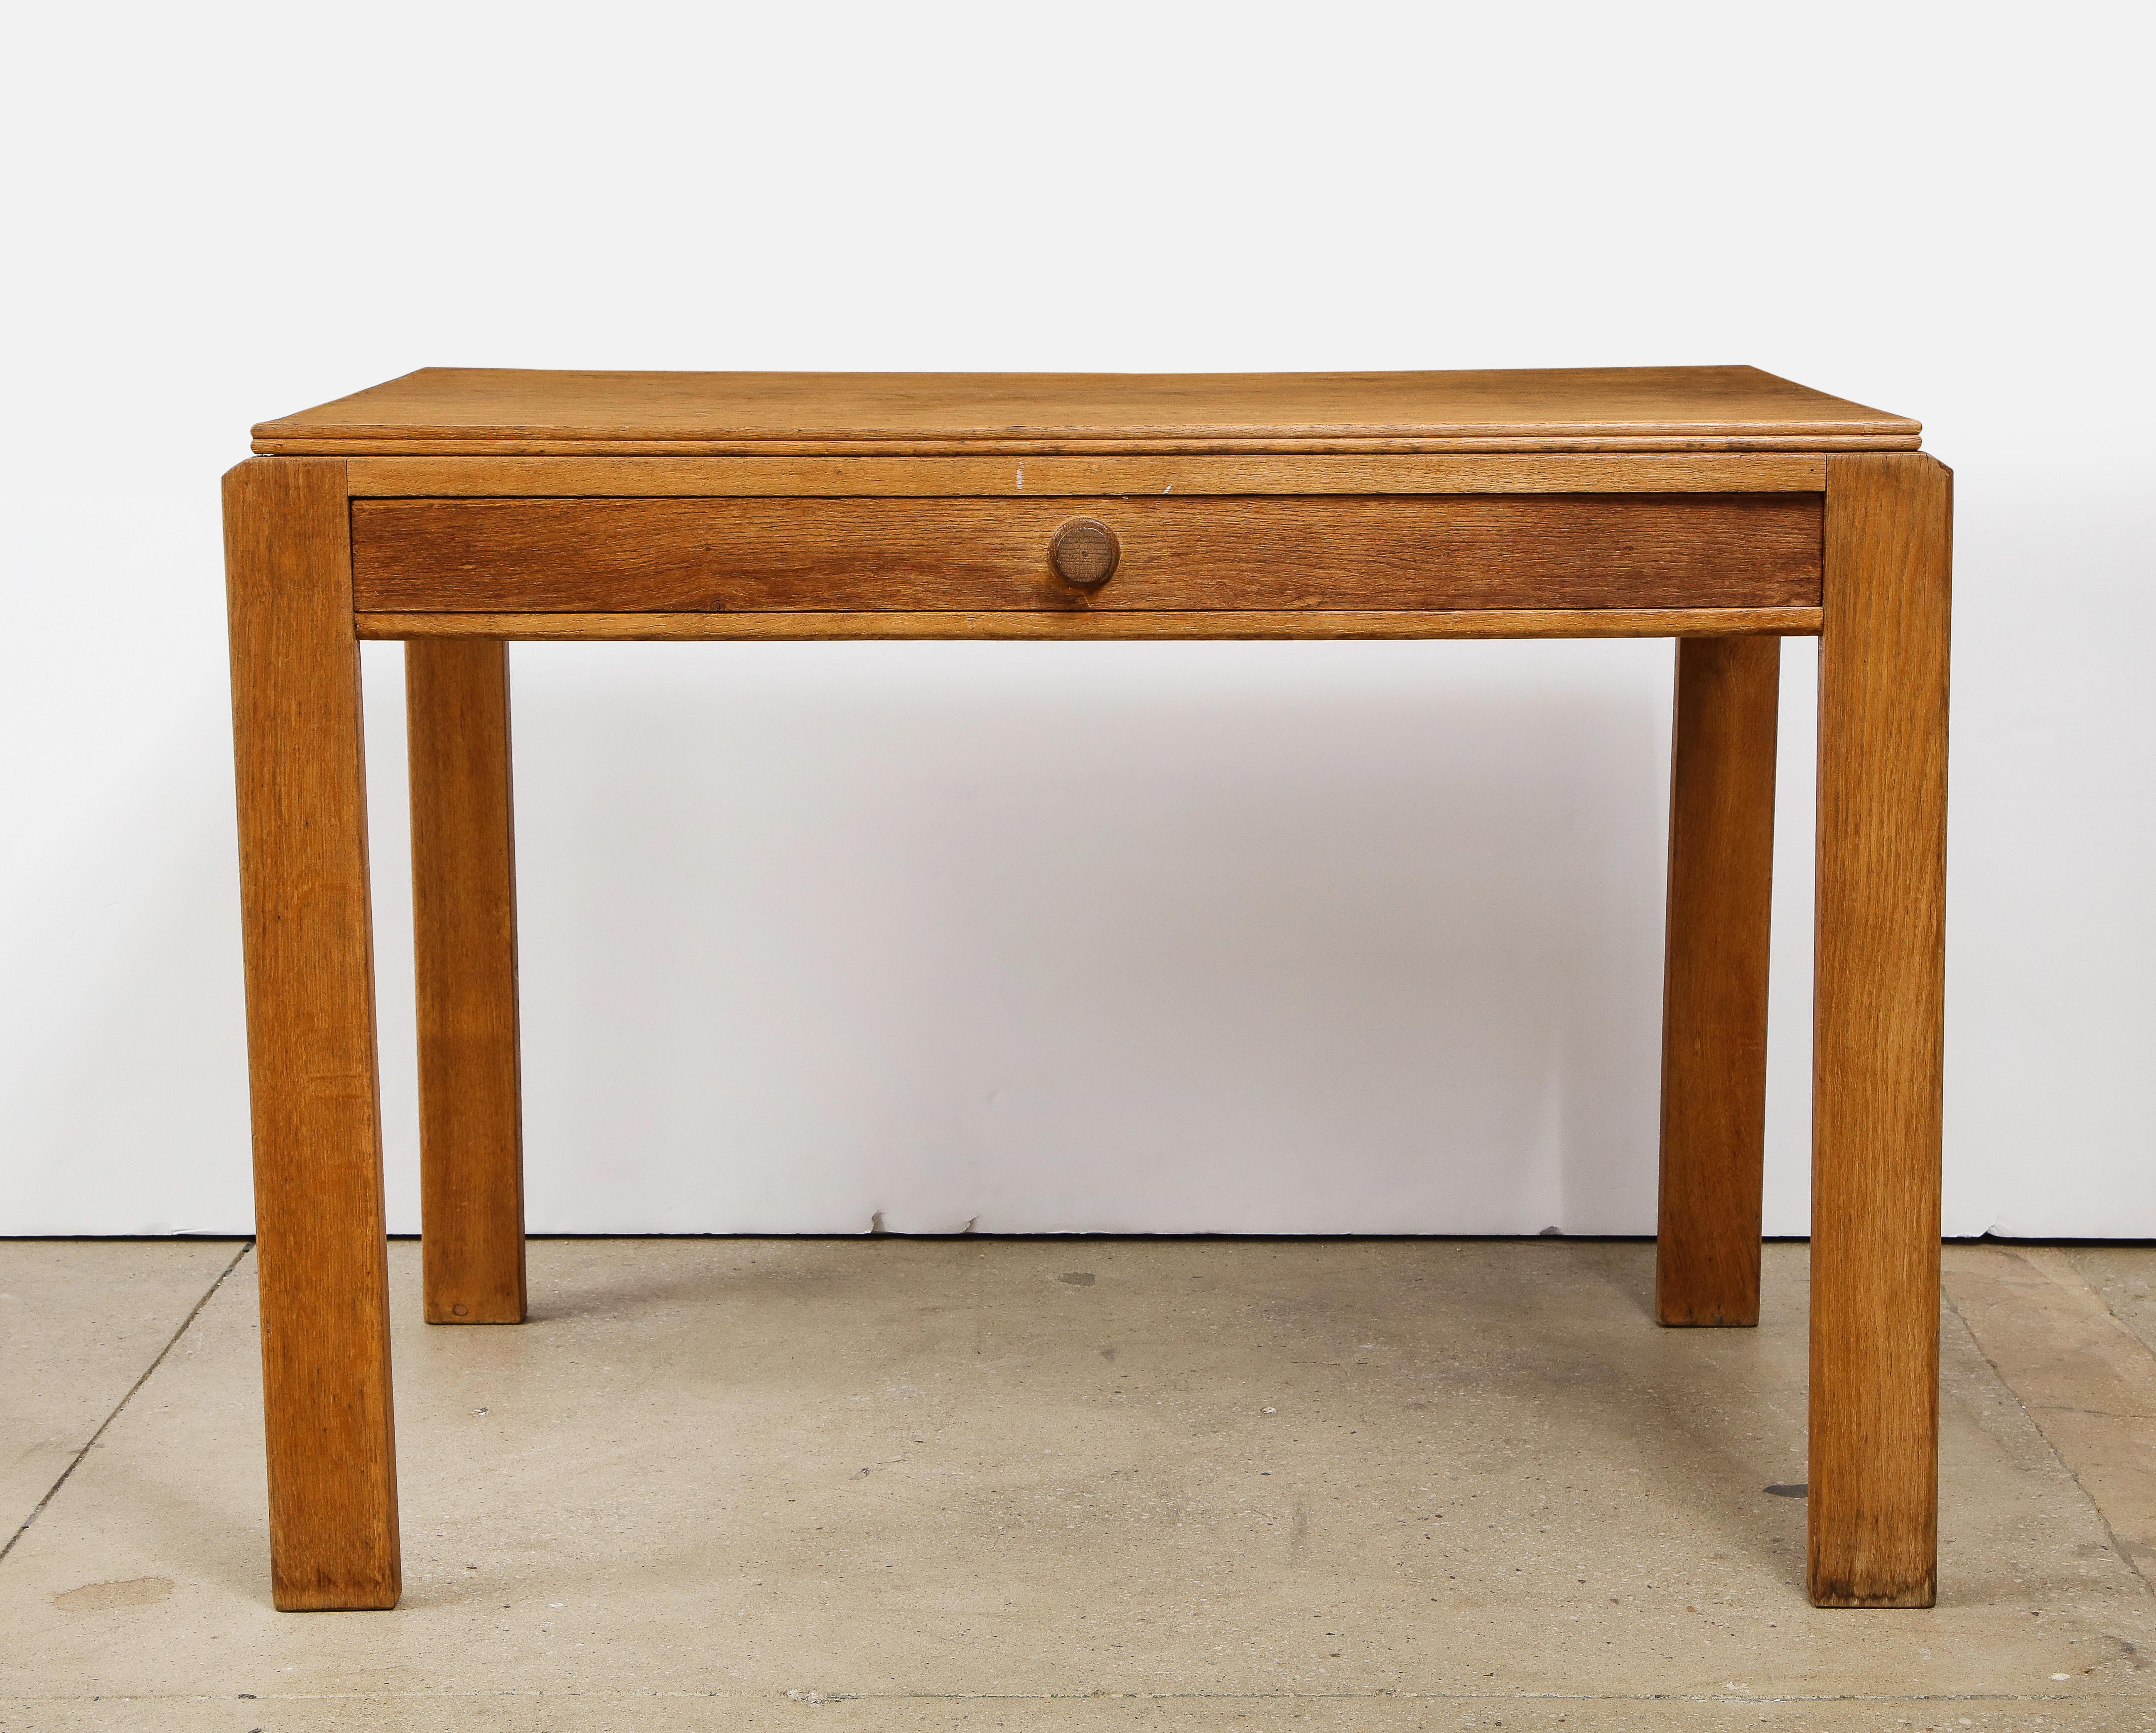 Vintage French oak table with drawer signed Mercier & Chaleyssin, circa 1940s.